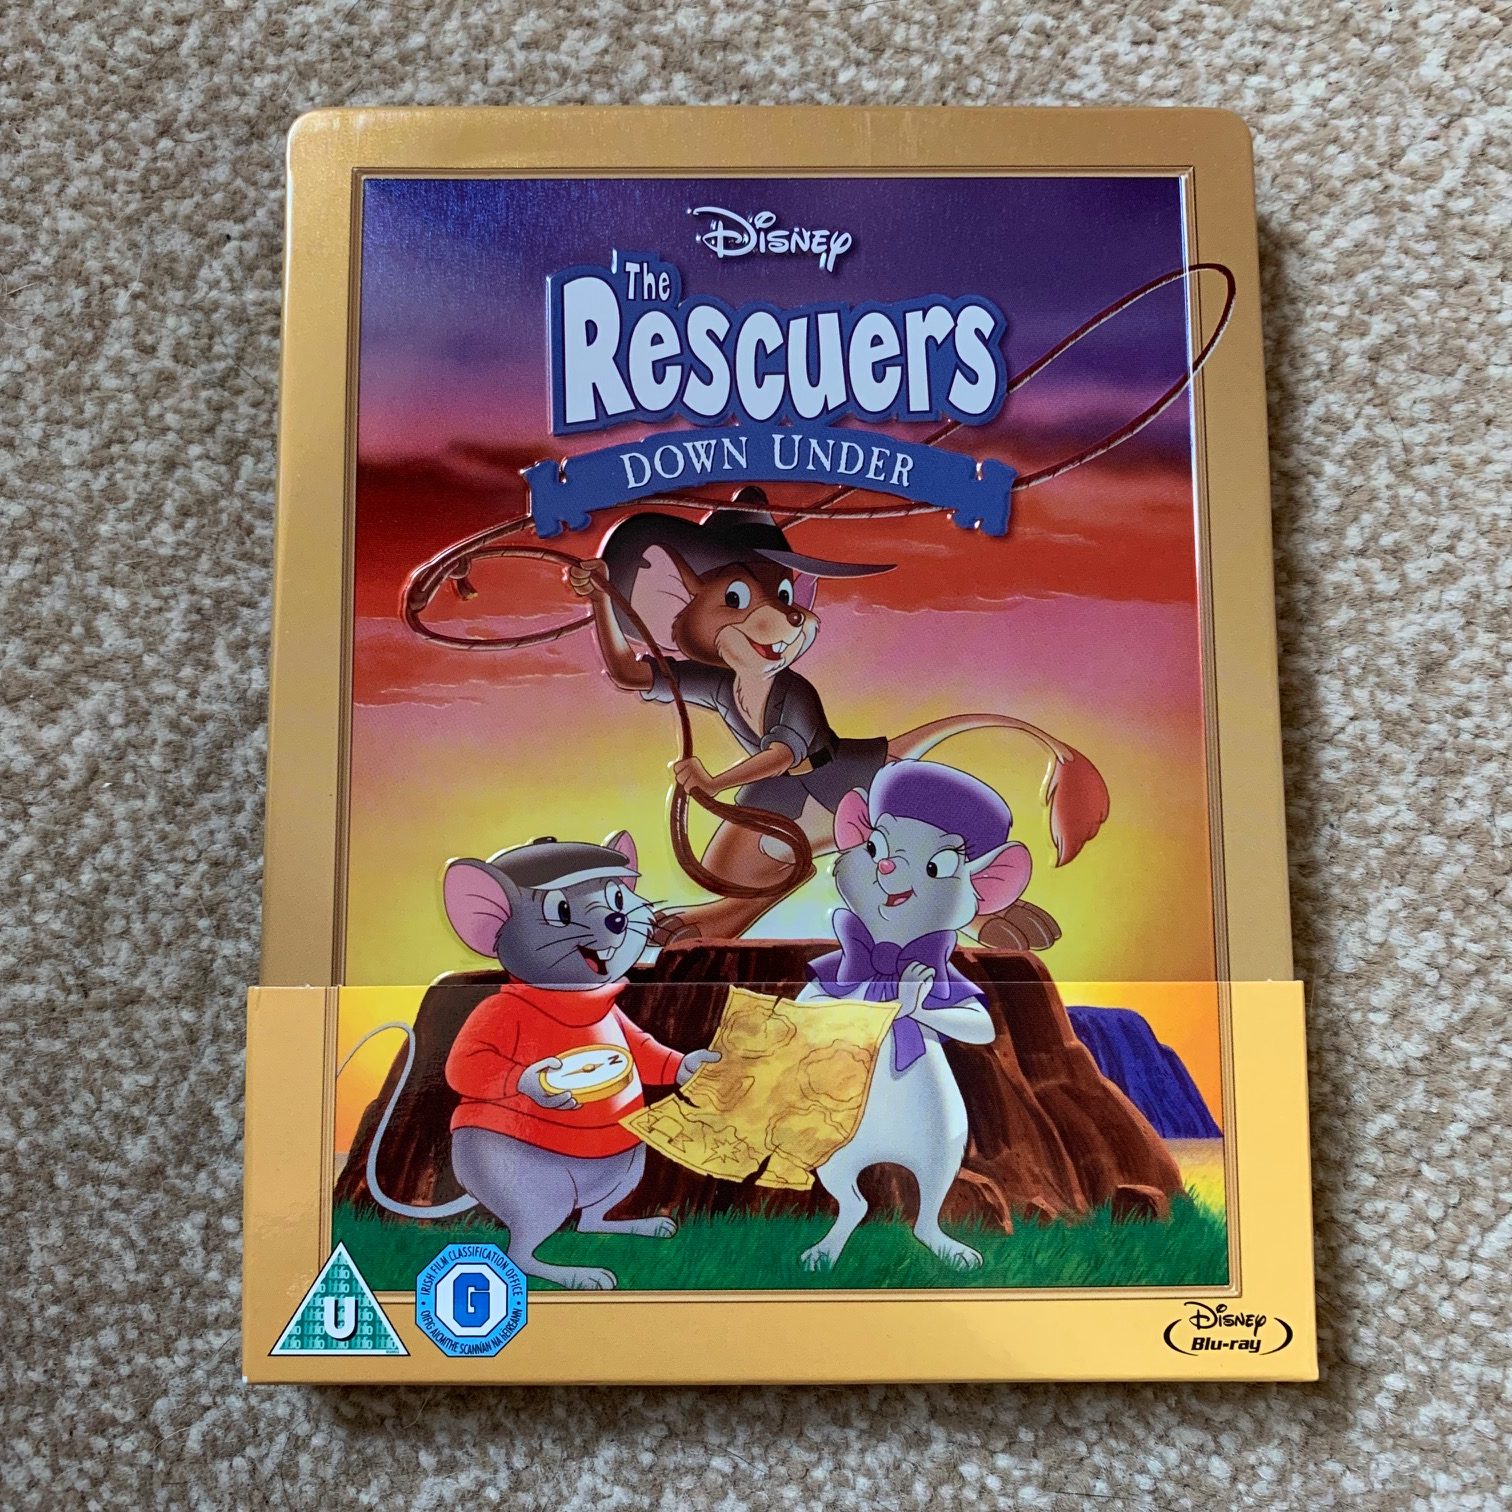 UK The Rescuers Down Under Zavvi Exclusive Blu-ray SteelBook review.